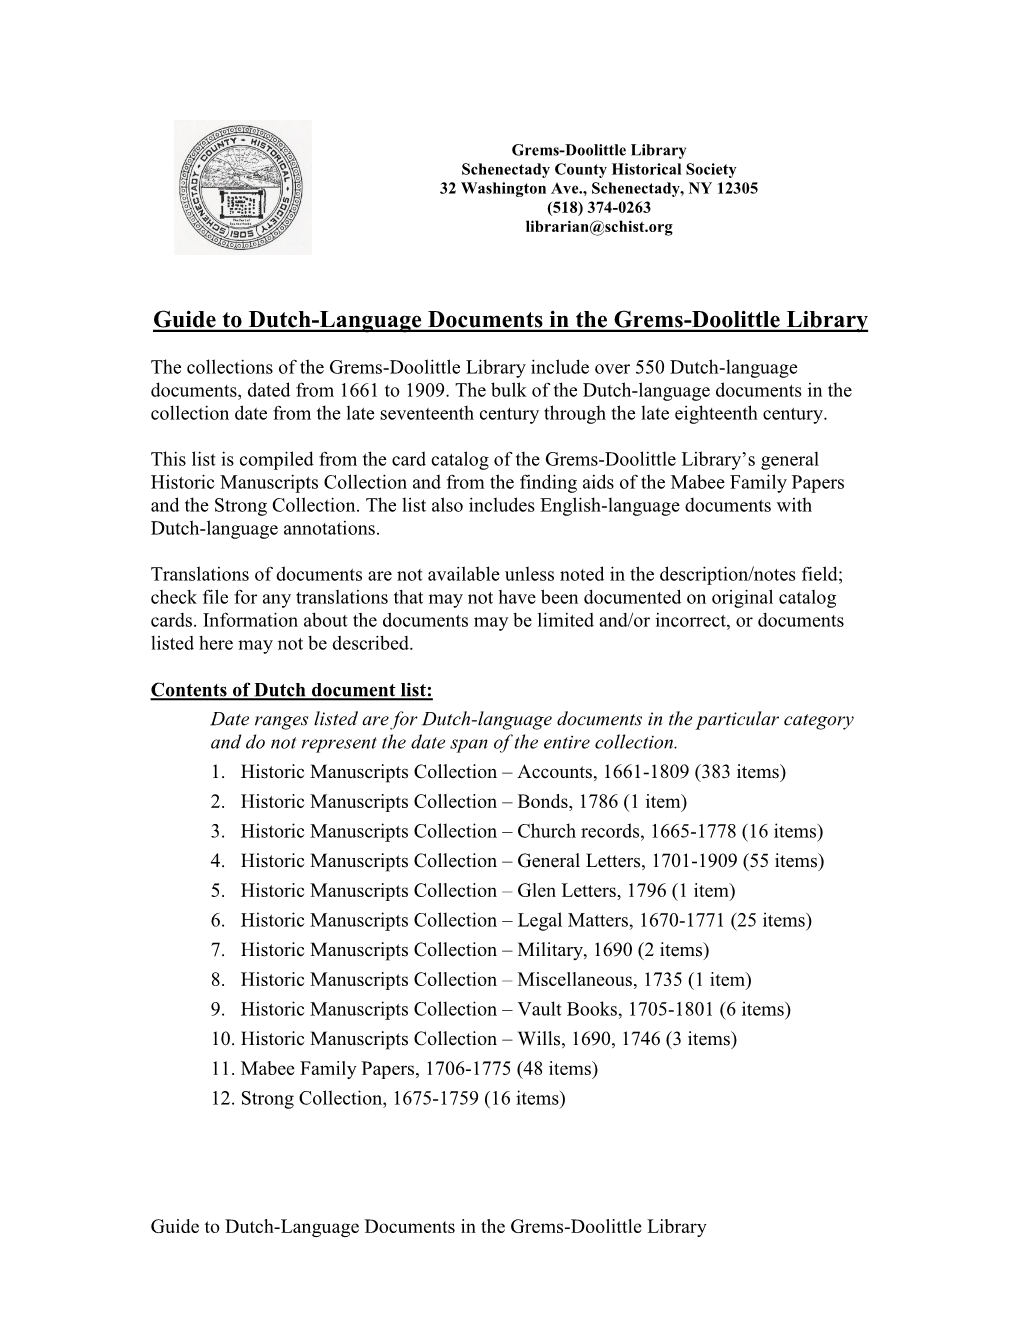 Guide to Dutch-Language Documents in the Grems-Doolittle Library